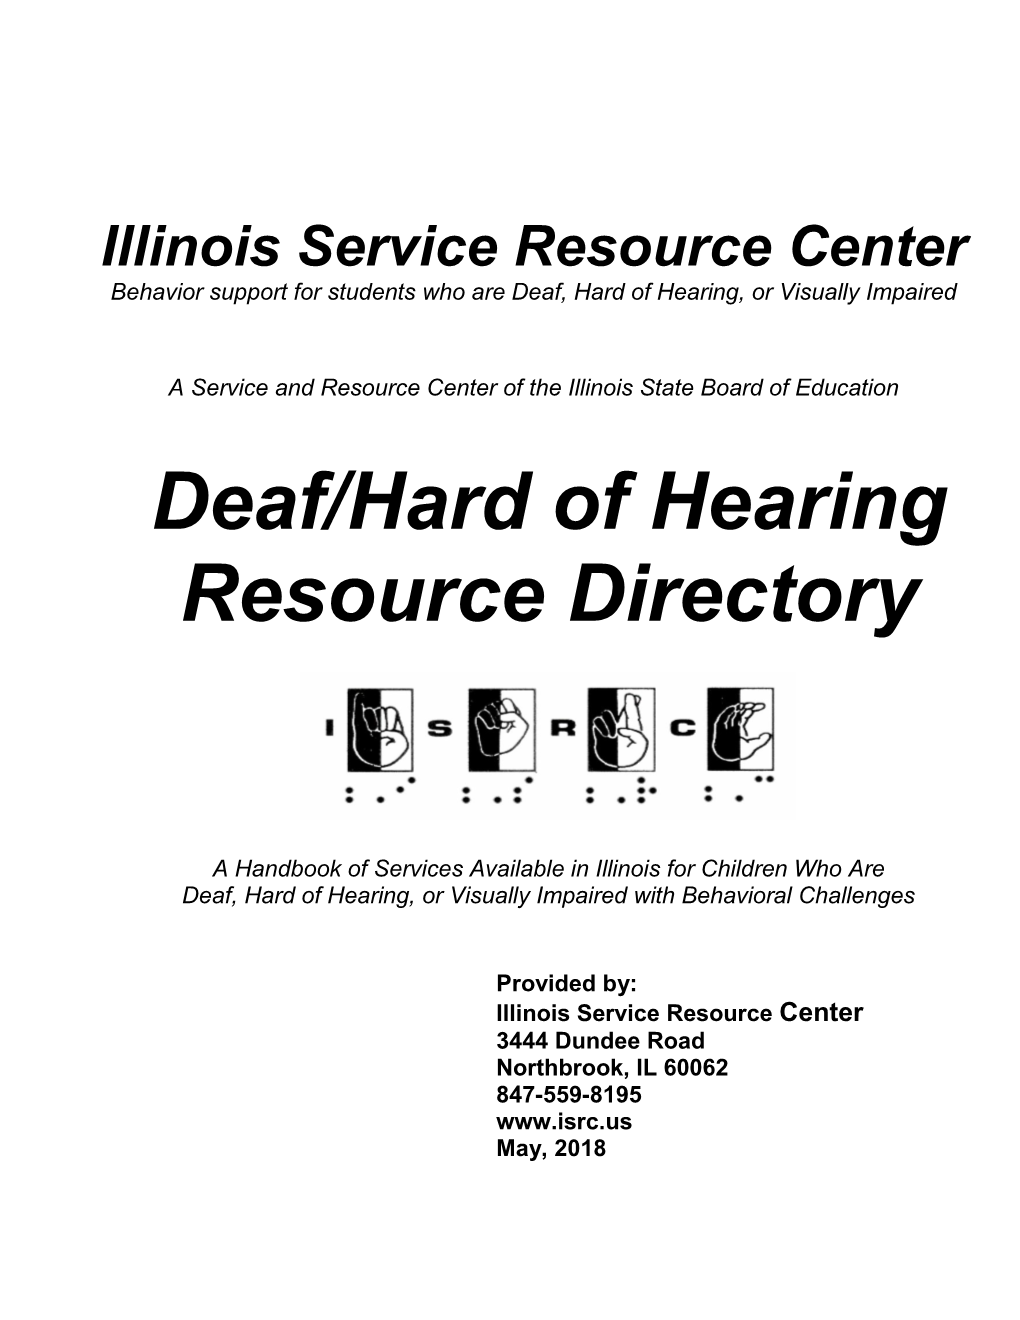 Deaf/Hard of Hearing Resource Directory